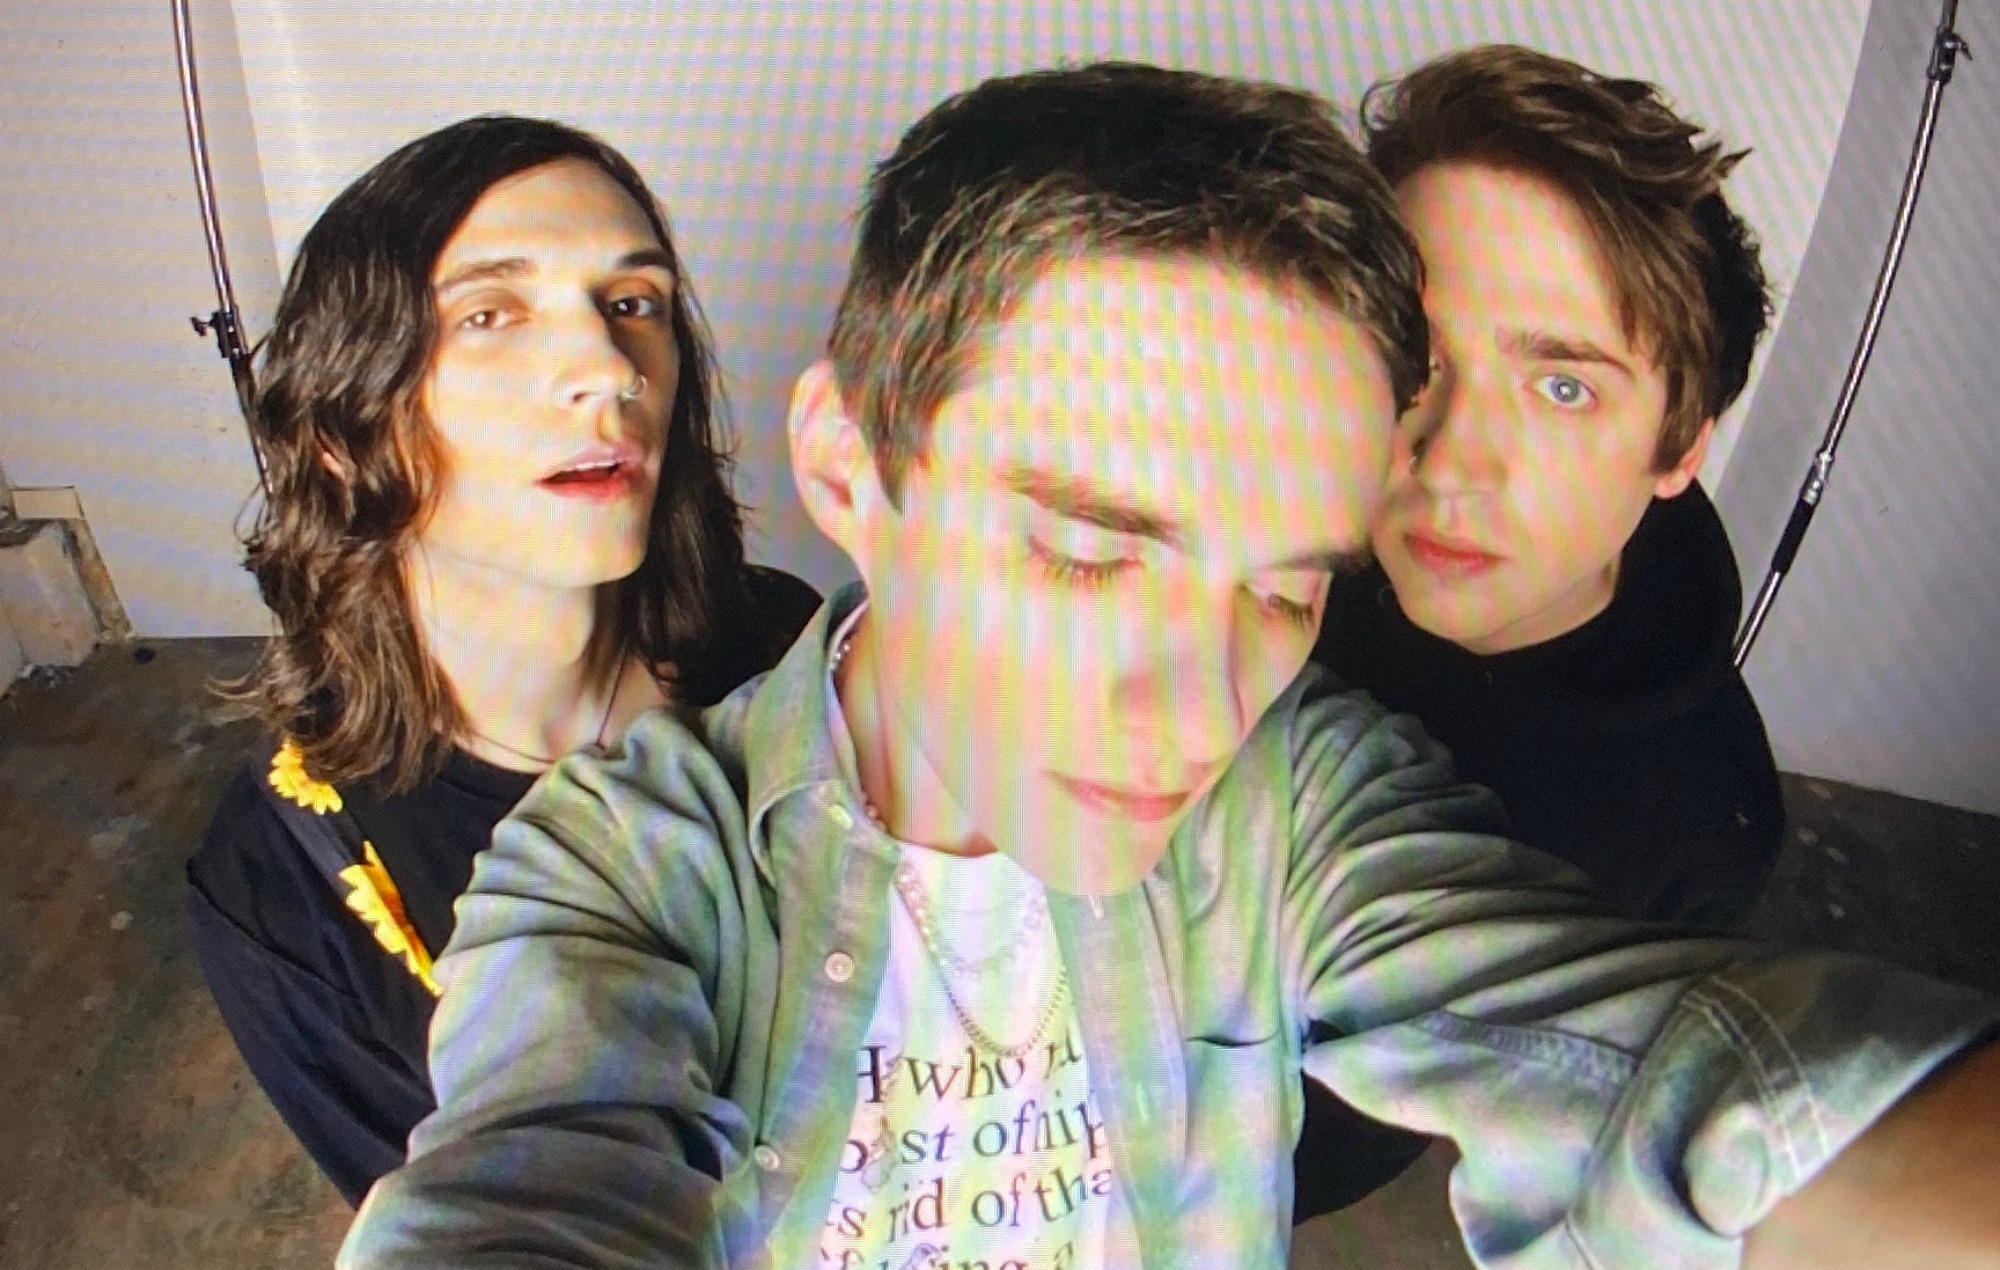 Five things we learned from our In Conversation video chat with Waterparks